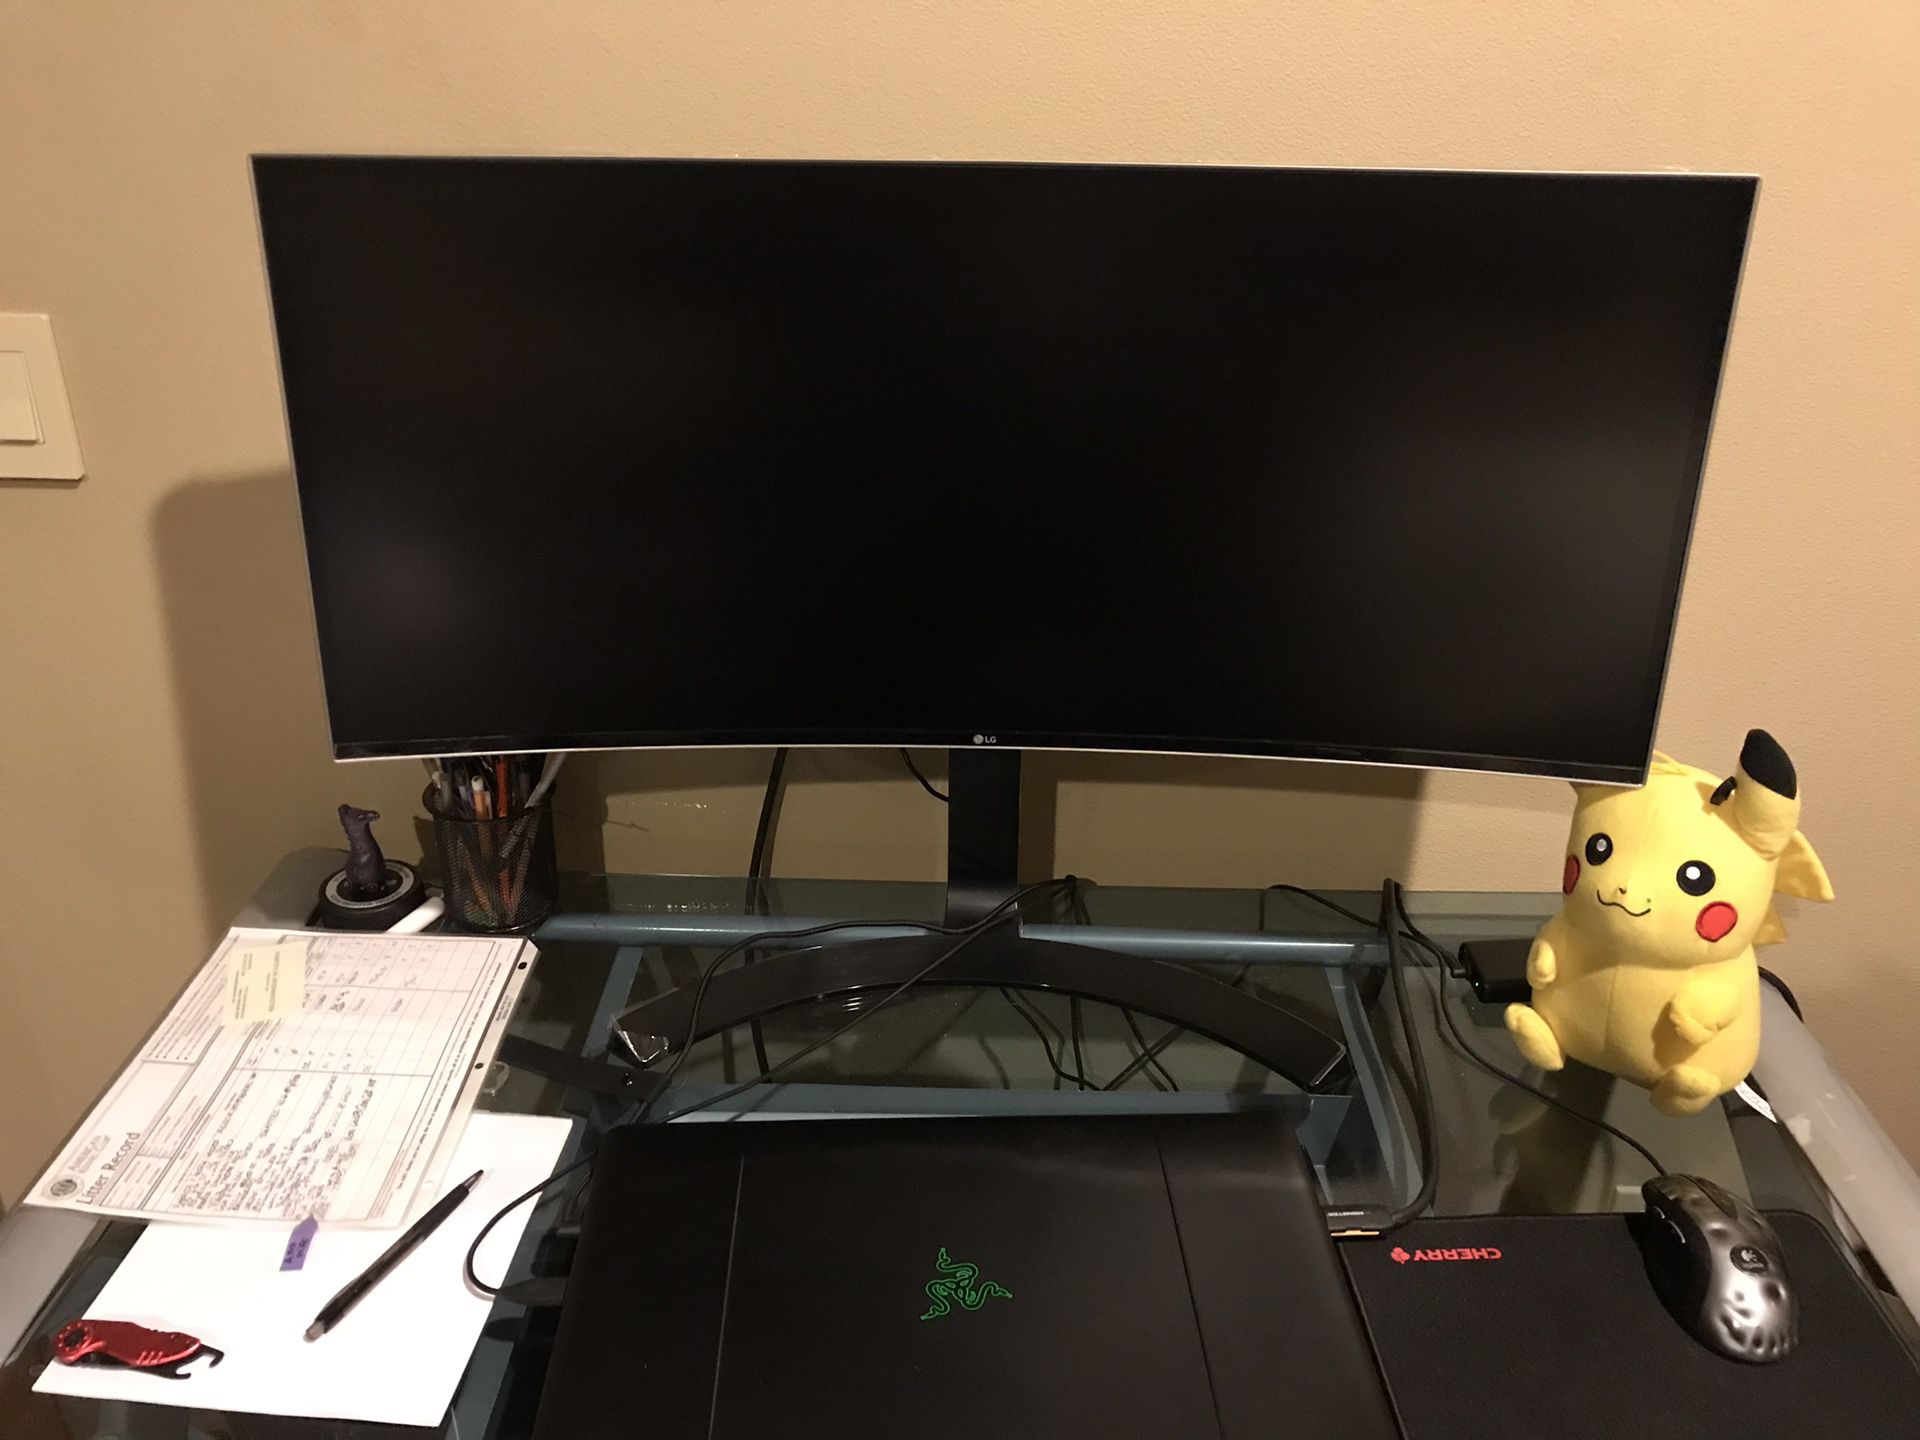 New LG Curved UltraWide 34” Monitor